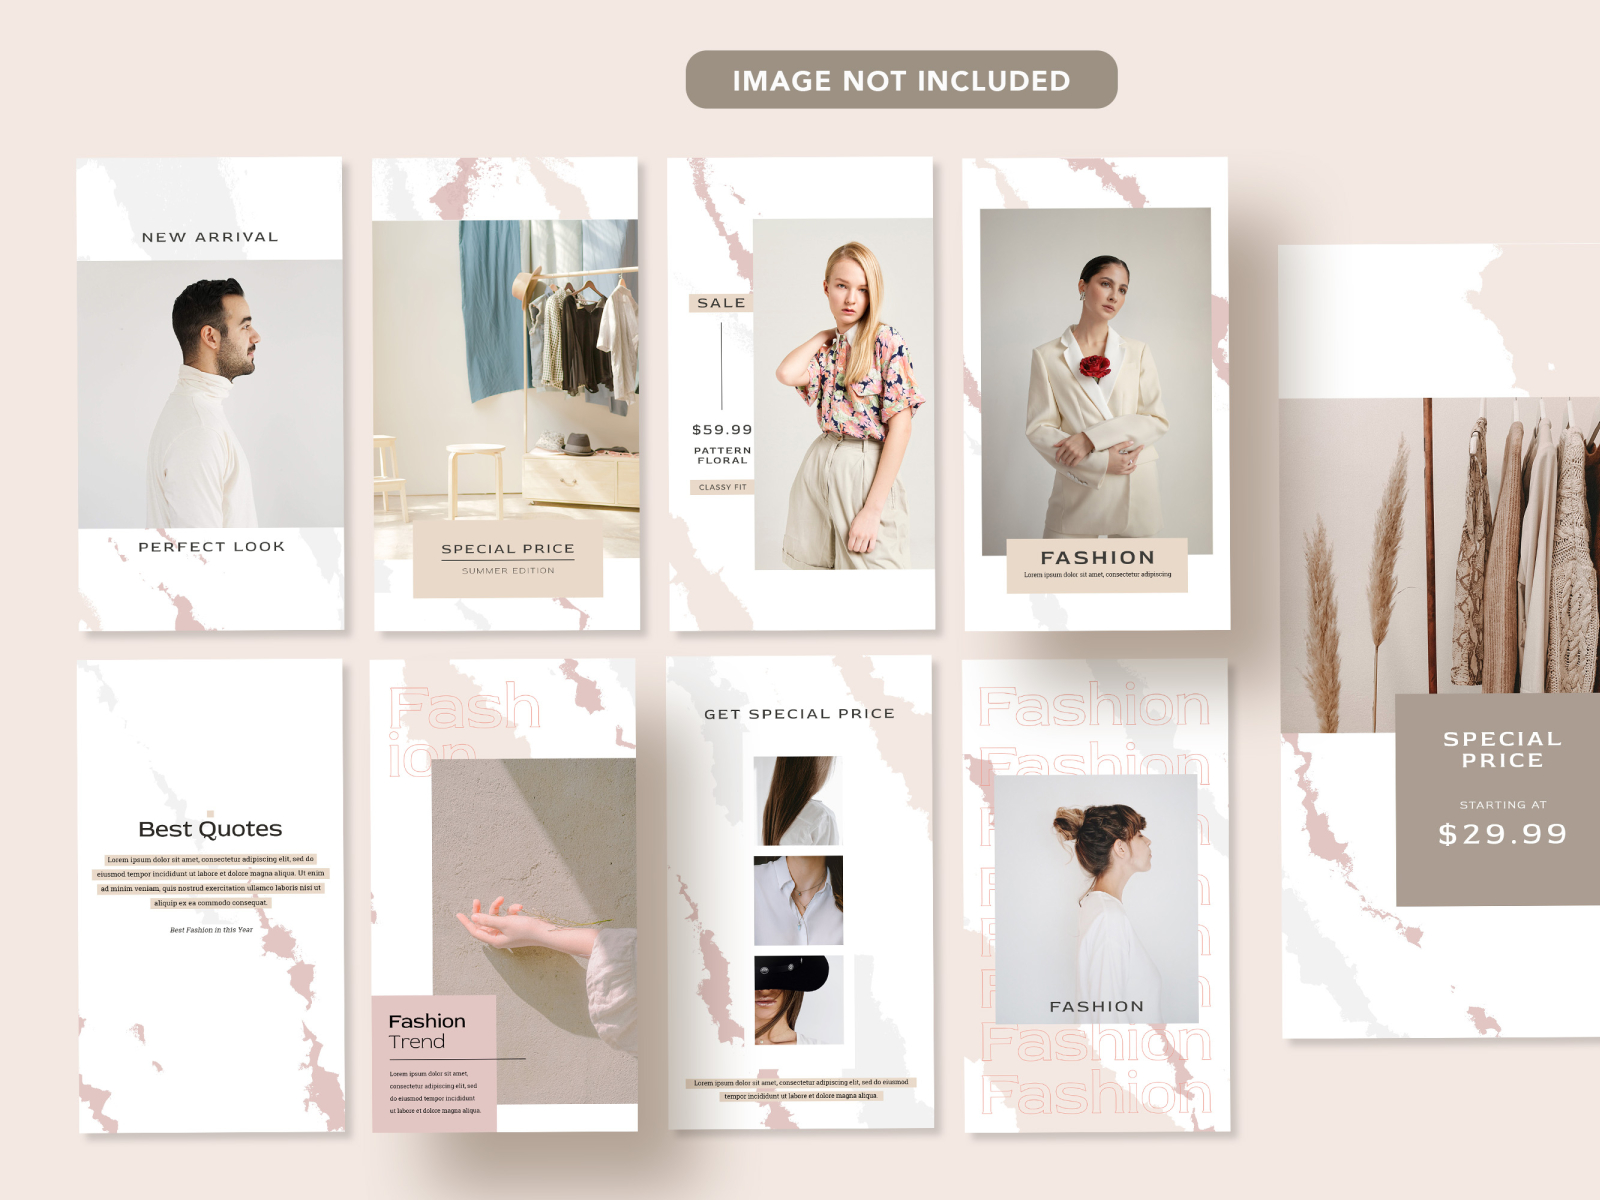 Calm Fashion Template by Finest Lab Creative Std. on Dribbble